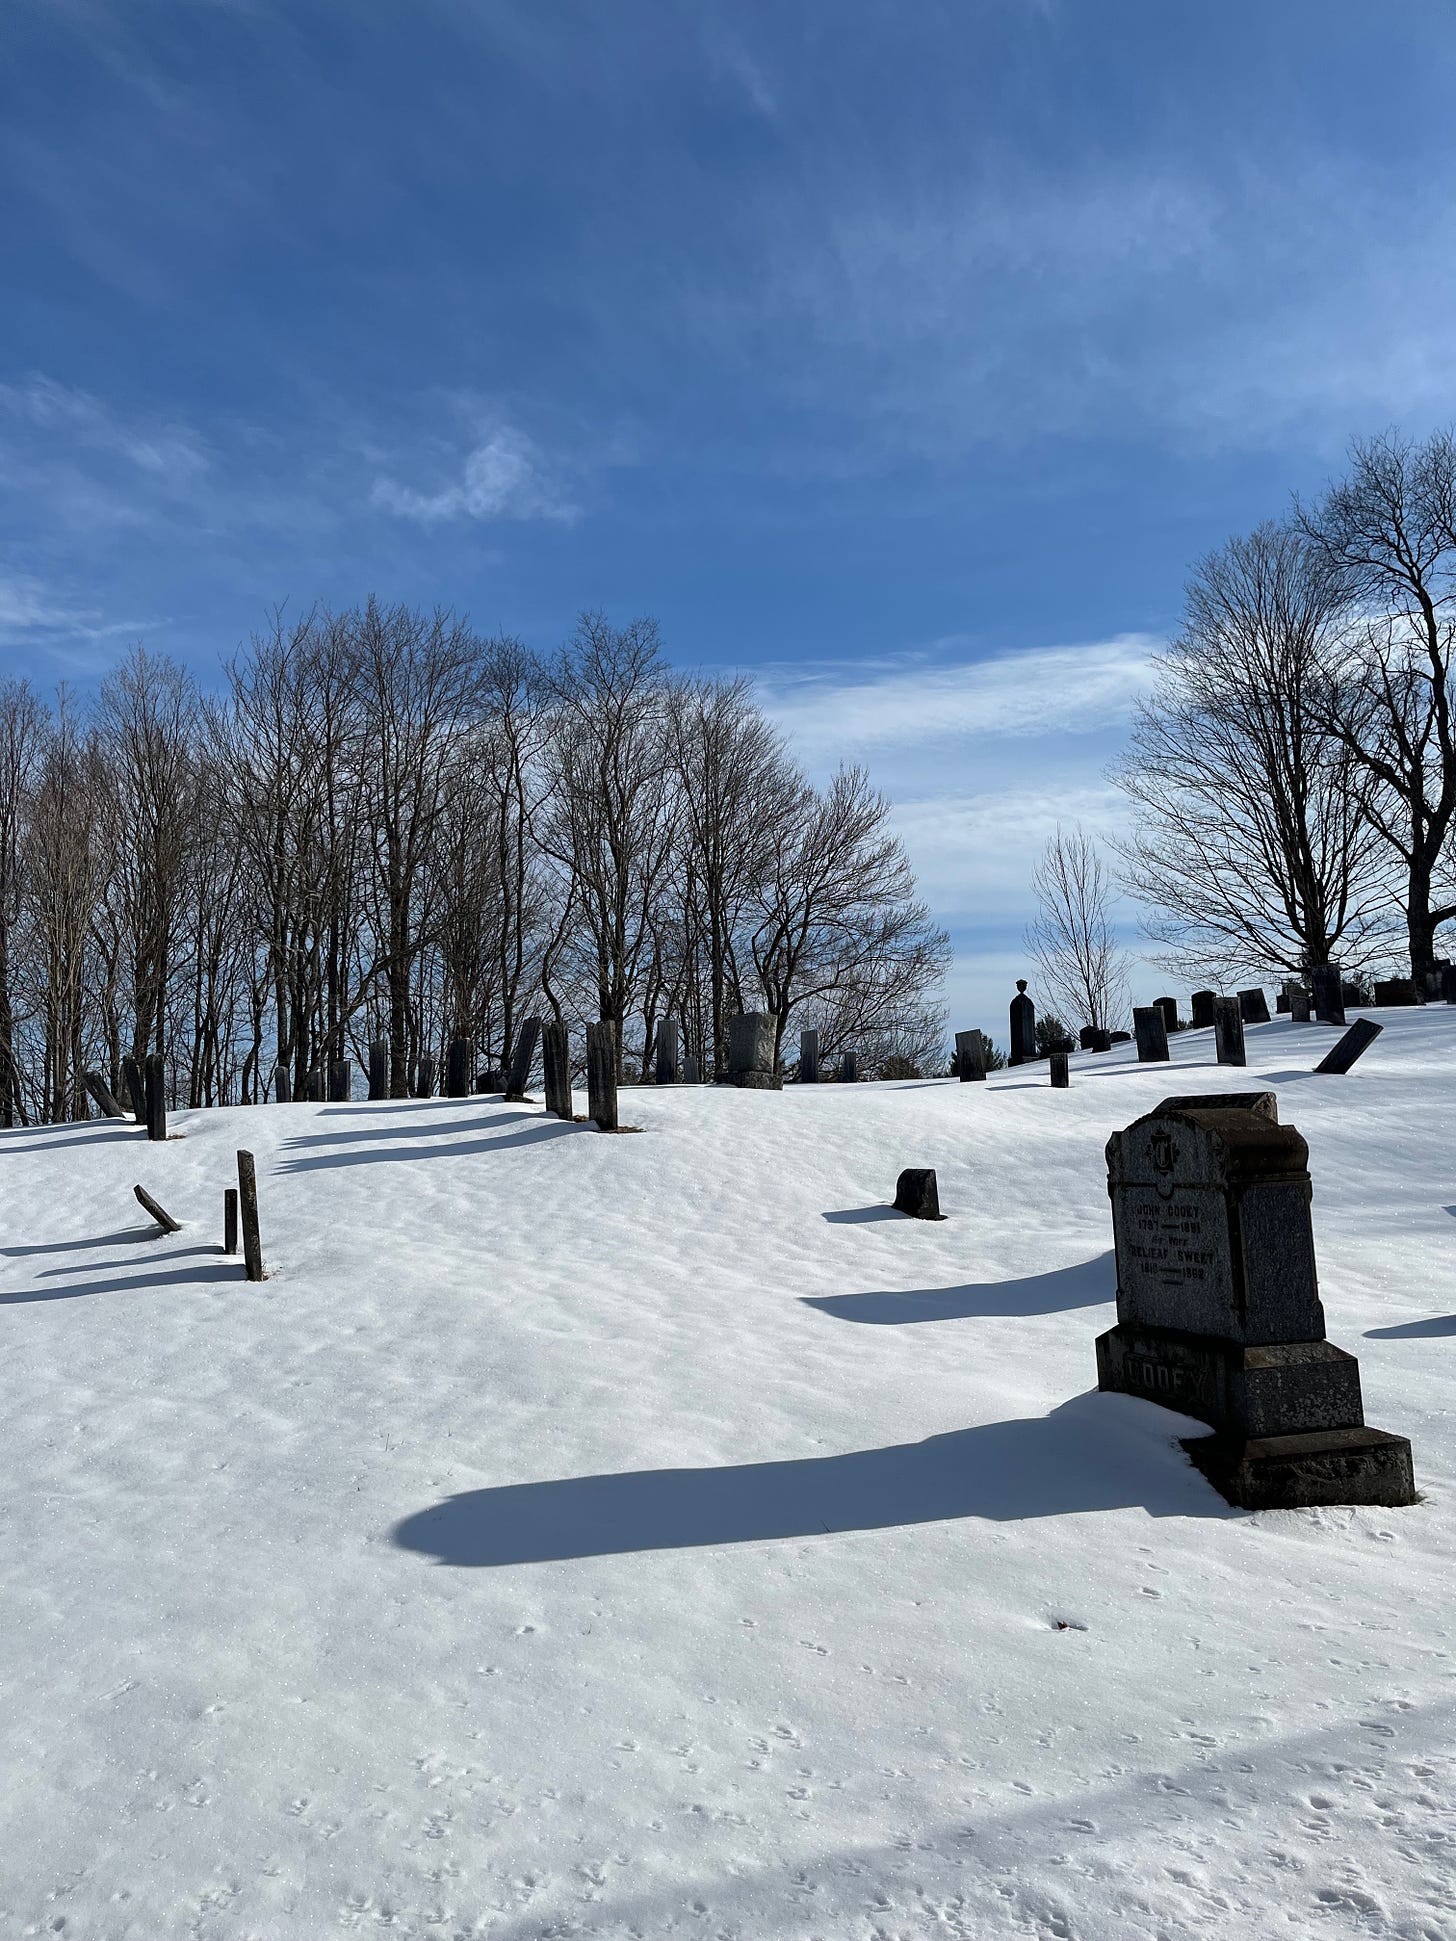 Snow covered country cemetary